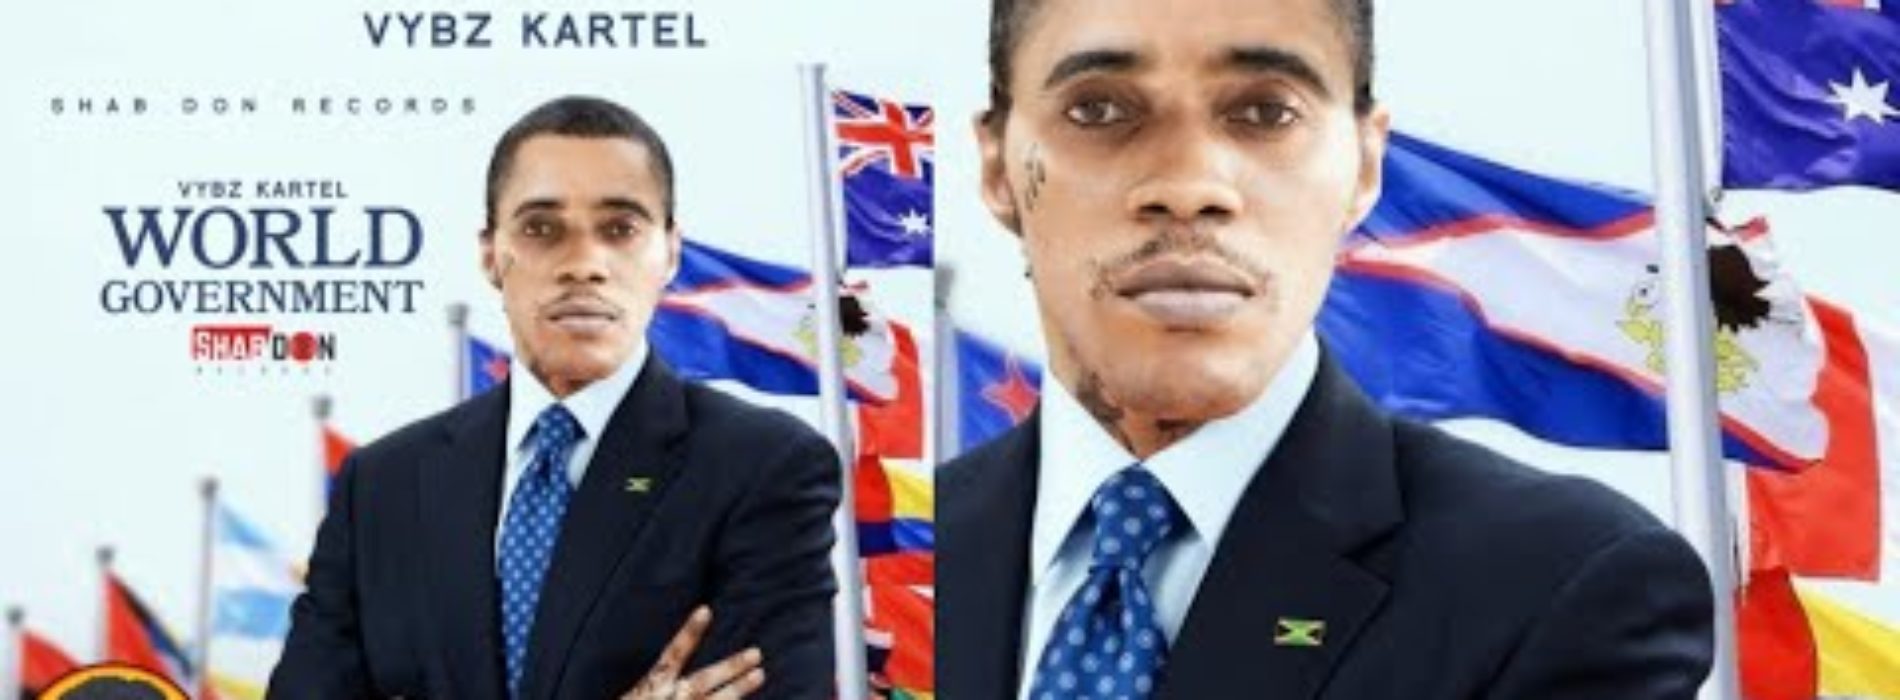 Vybz Kartel – World Government (Official Video) – Janvier 2020